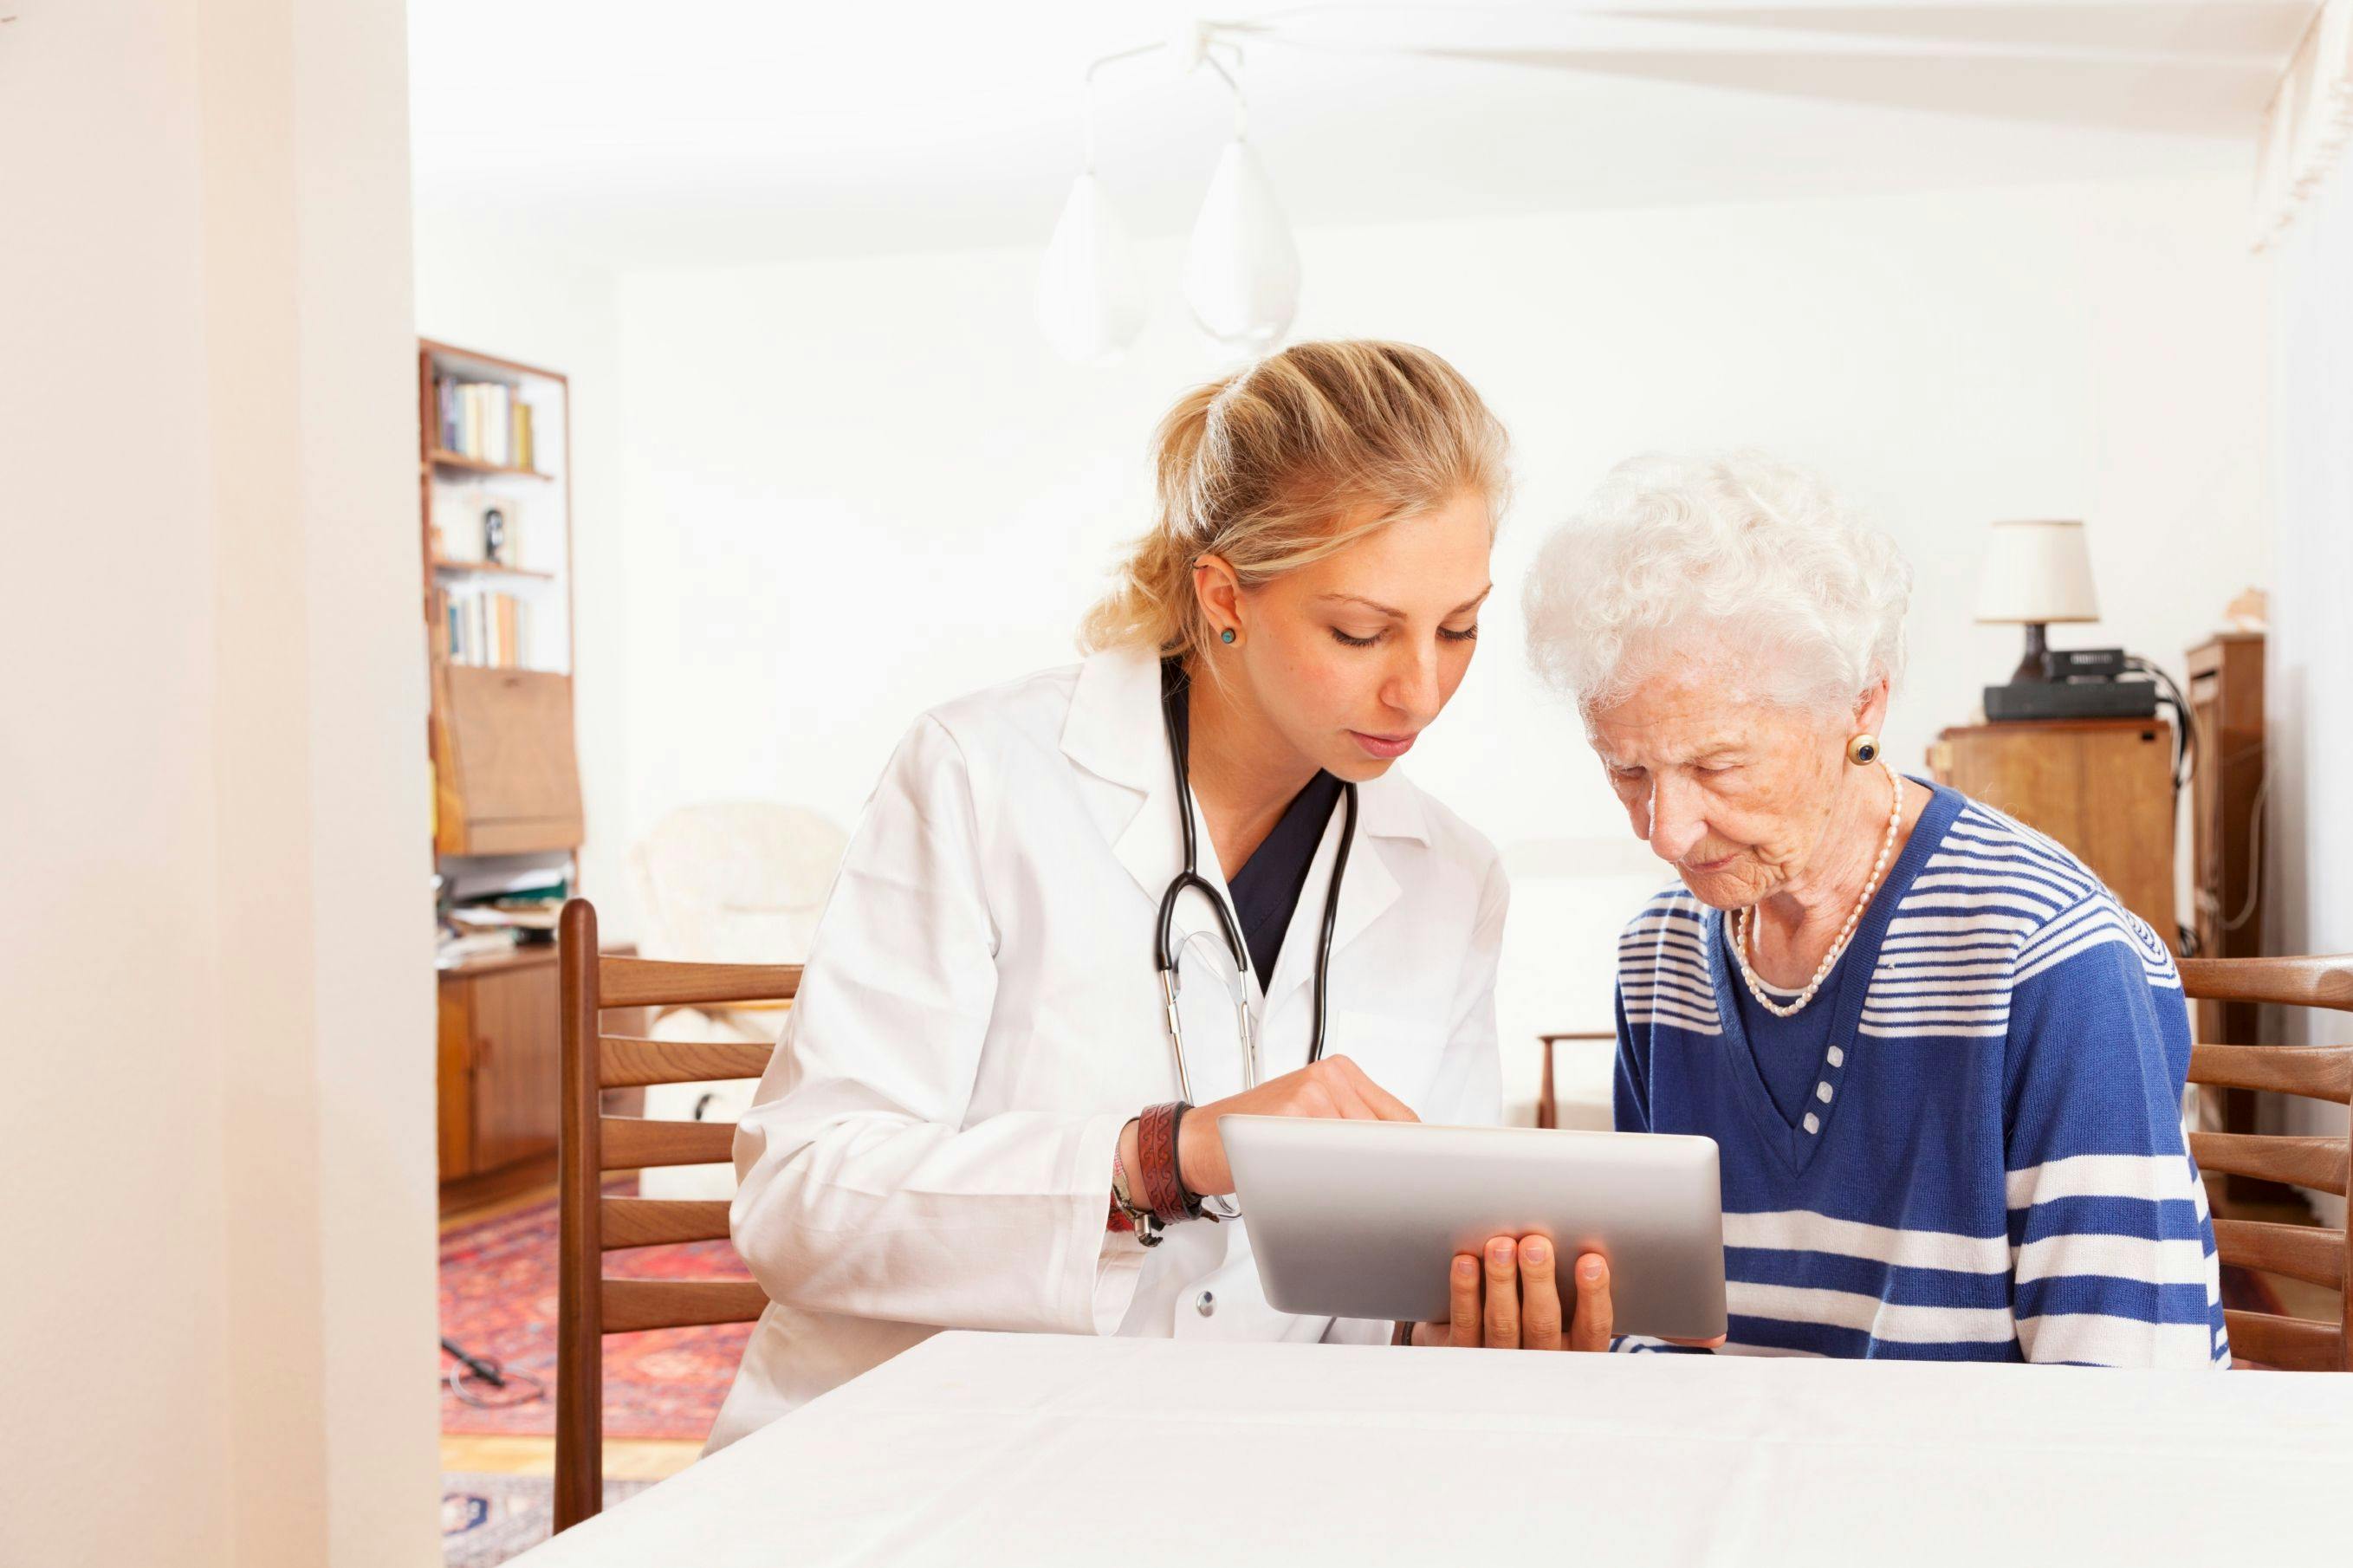 How a Collaborative Approach to Health-at-Home Care Creates Value